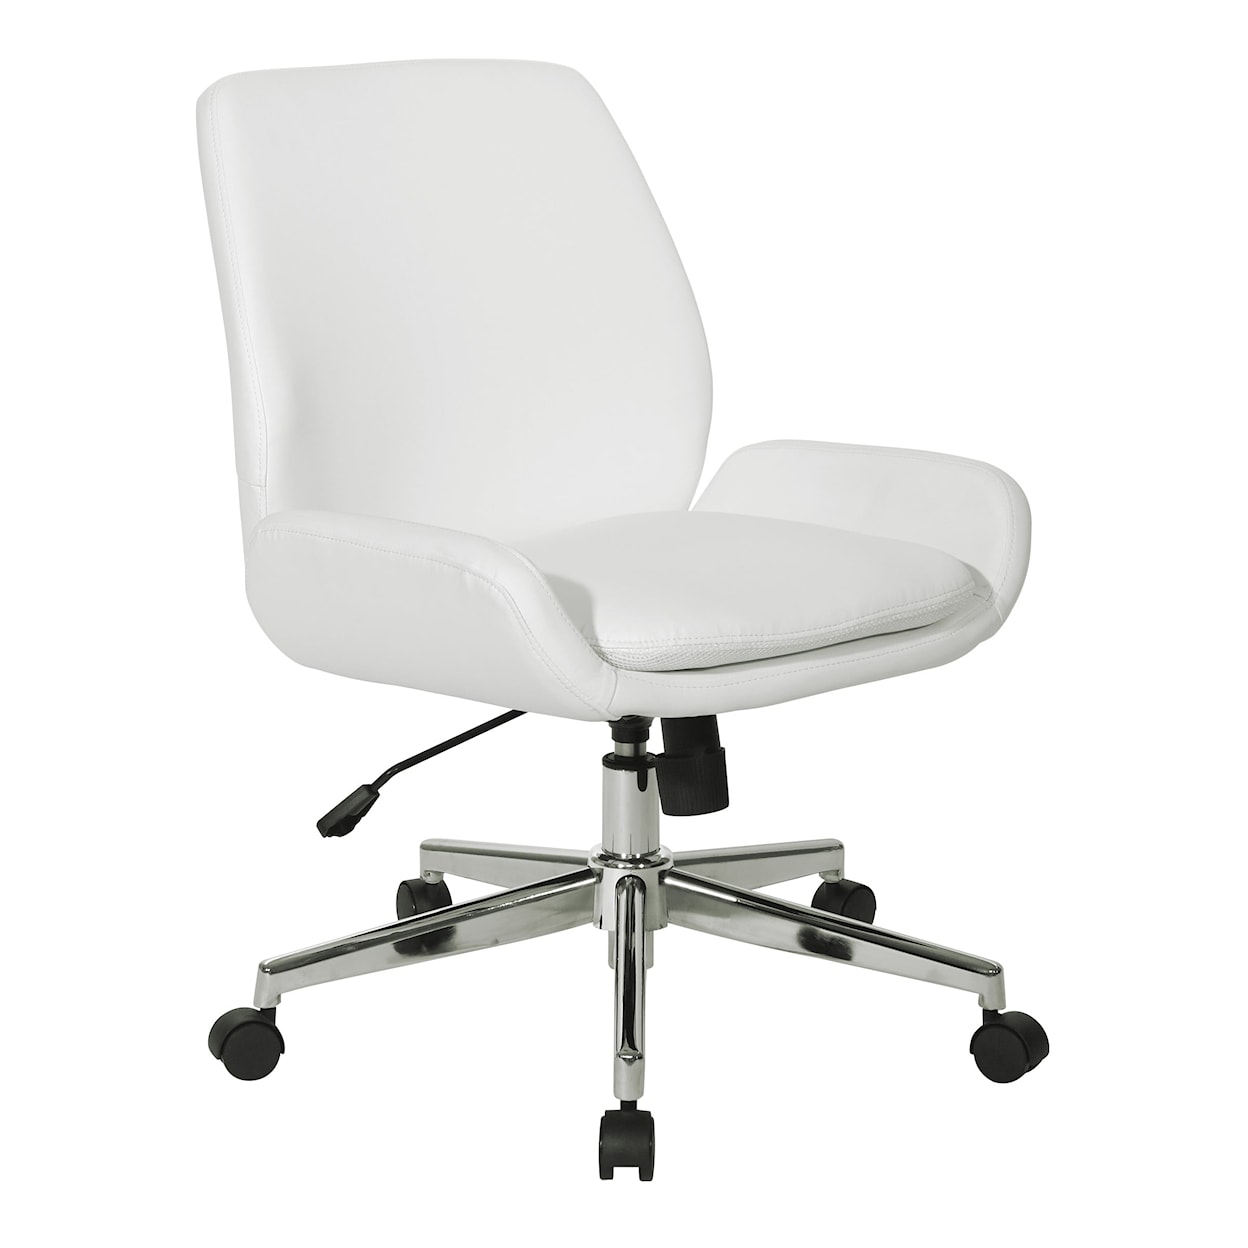 Office Star Executive Seating Office Chair